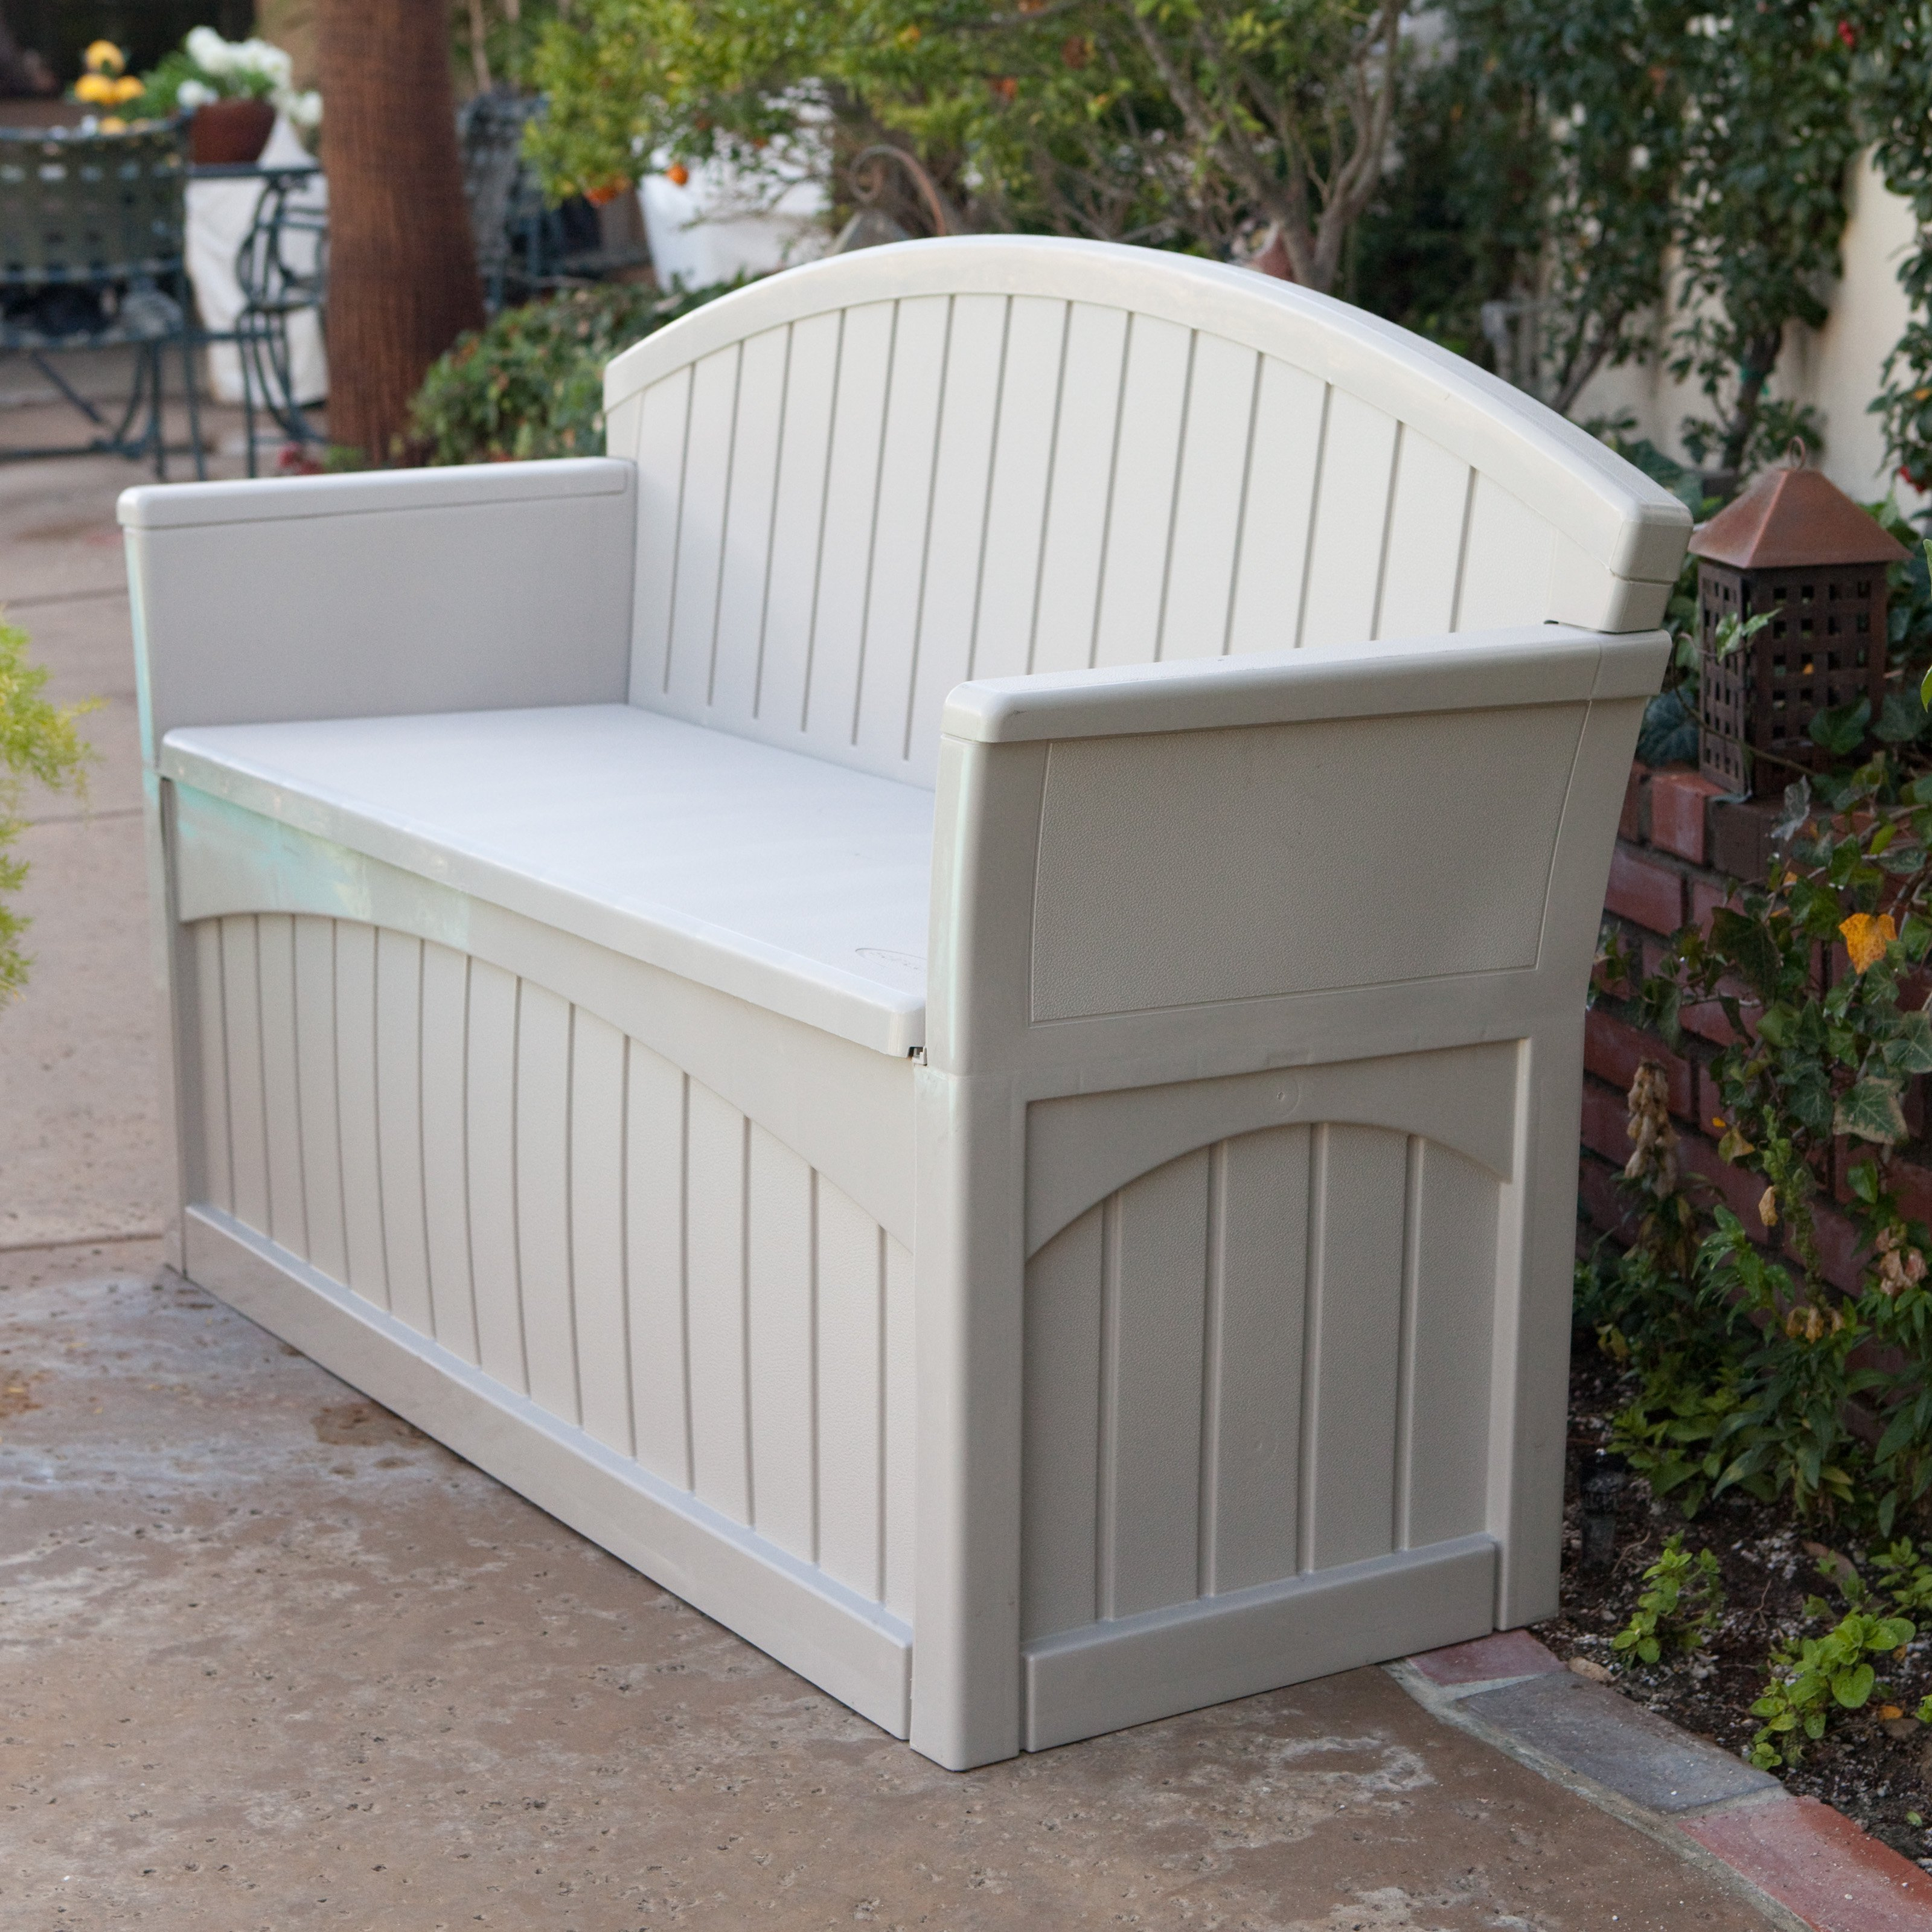 Tips Ideas Interesting Outdoor Storage Design With Deck Box With regarding size 3200 X 3200